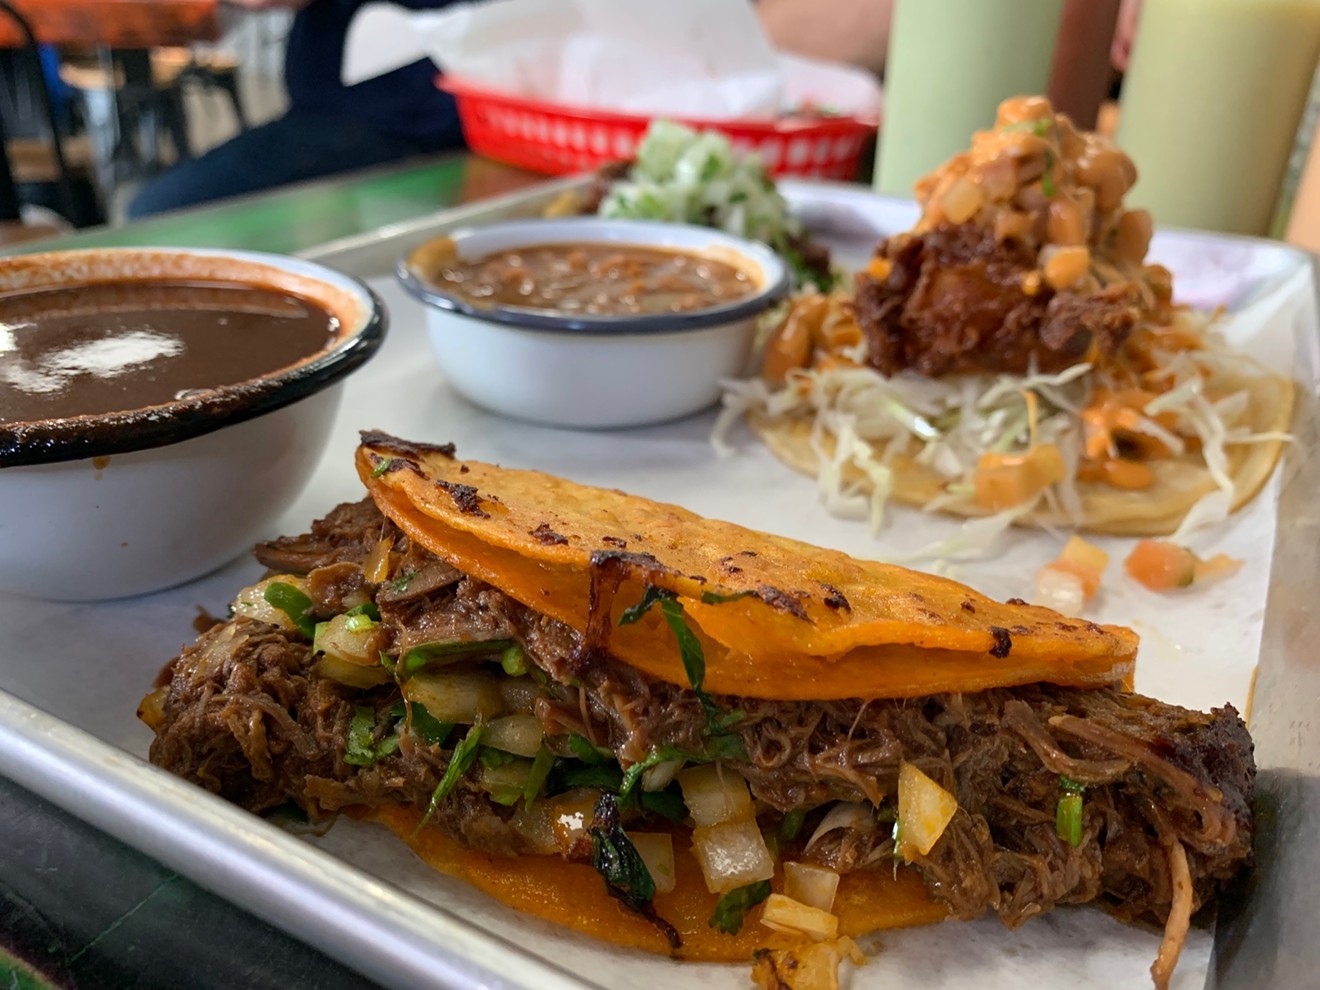 Tacos birria are messy and delicious.